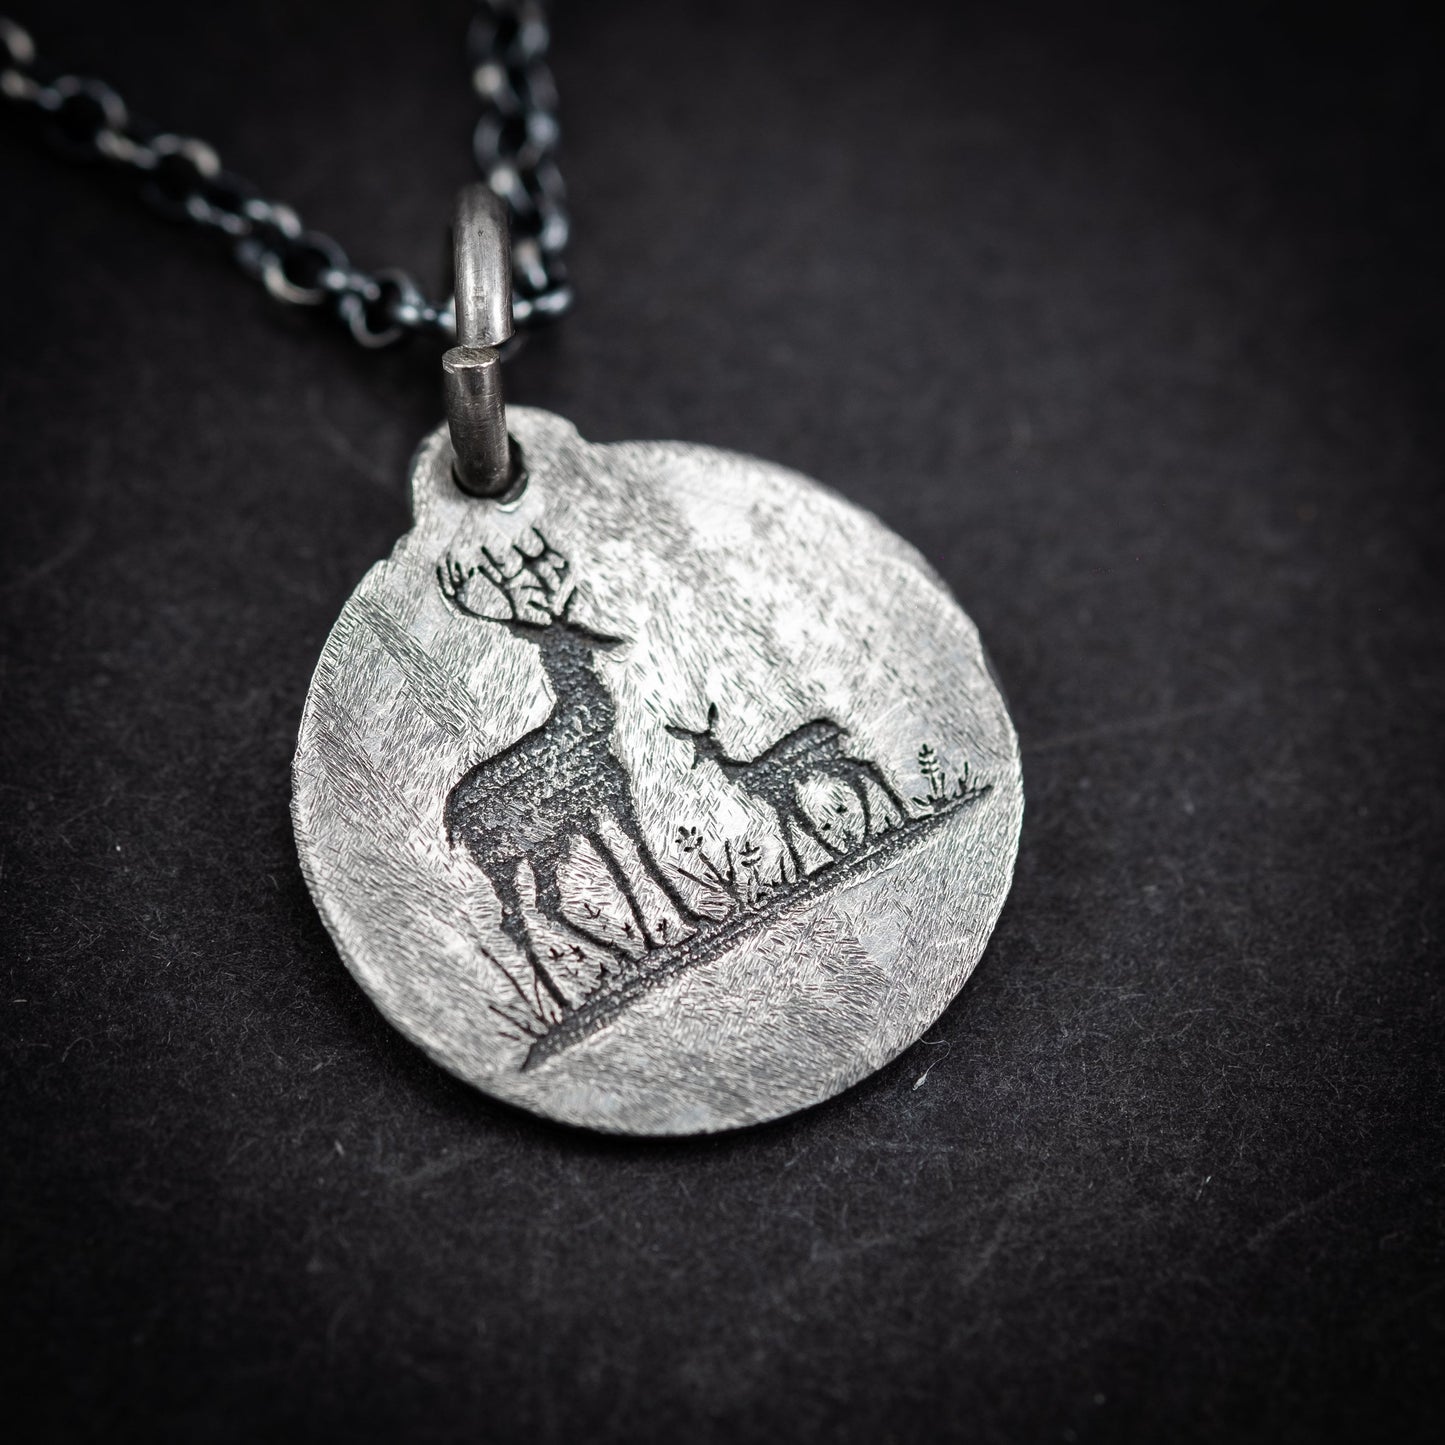 Deer Silver animal pendant necklace, Personalized forest nature jewelry, Christmas gifts, engraved necklace, gift for her, mens necklace